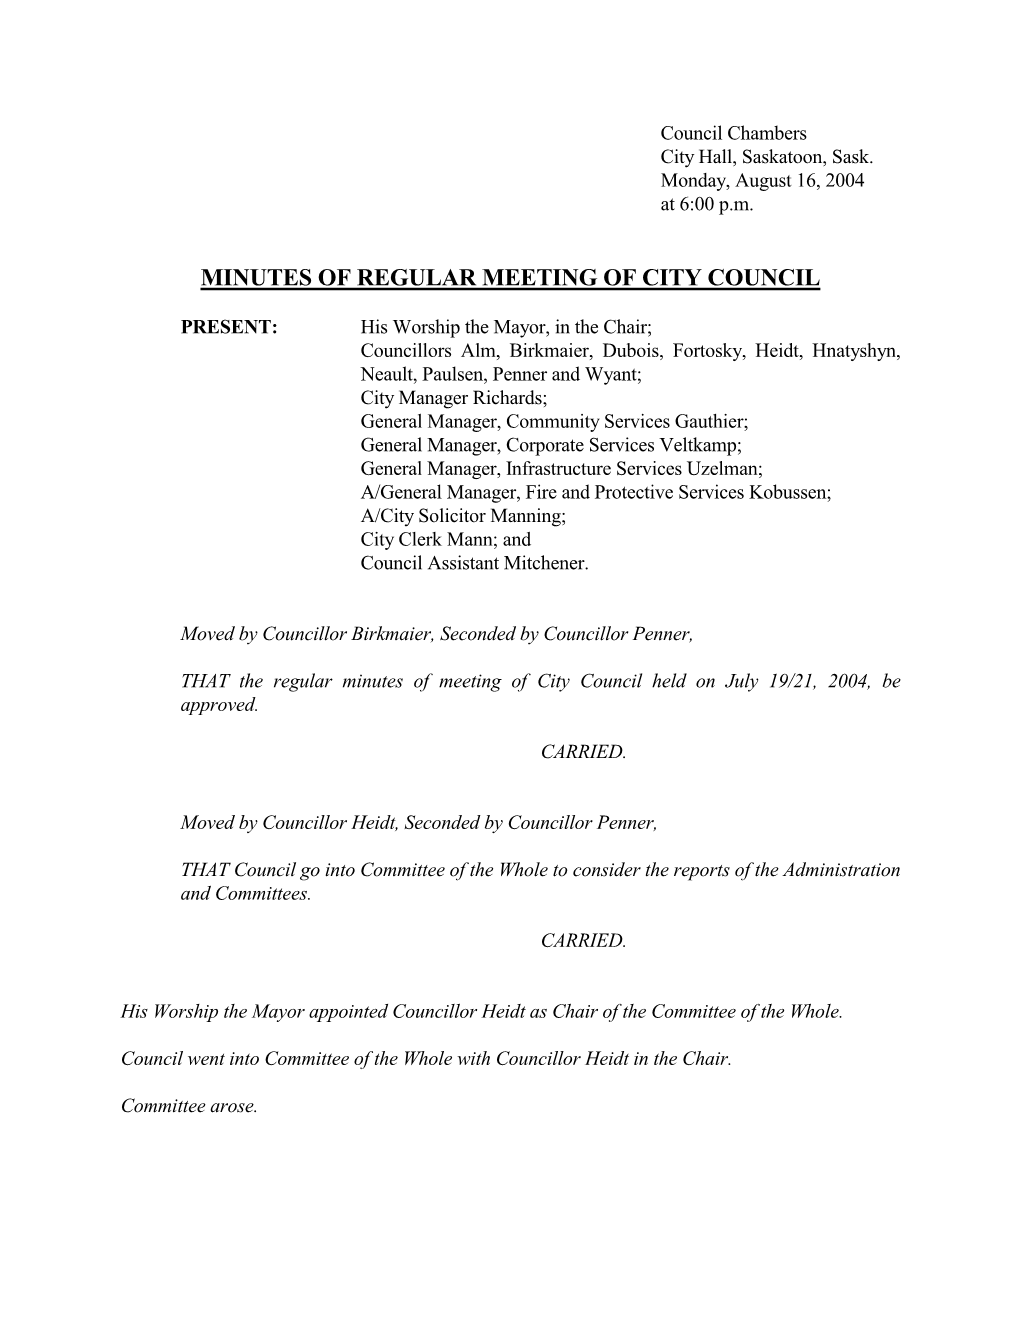 Minutes of Regular Meeting of City Council